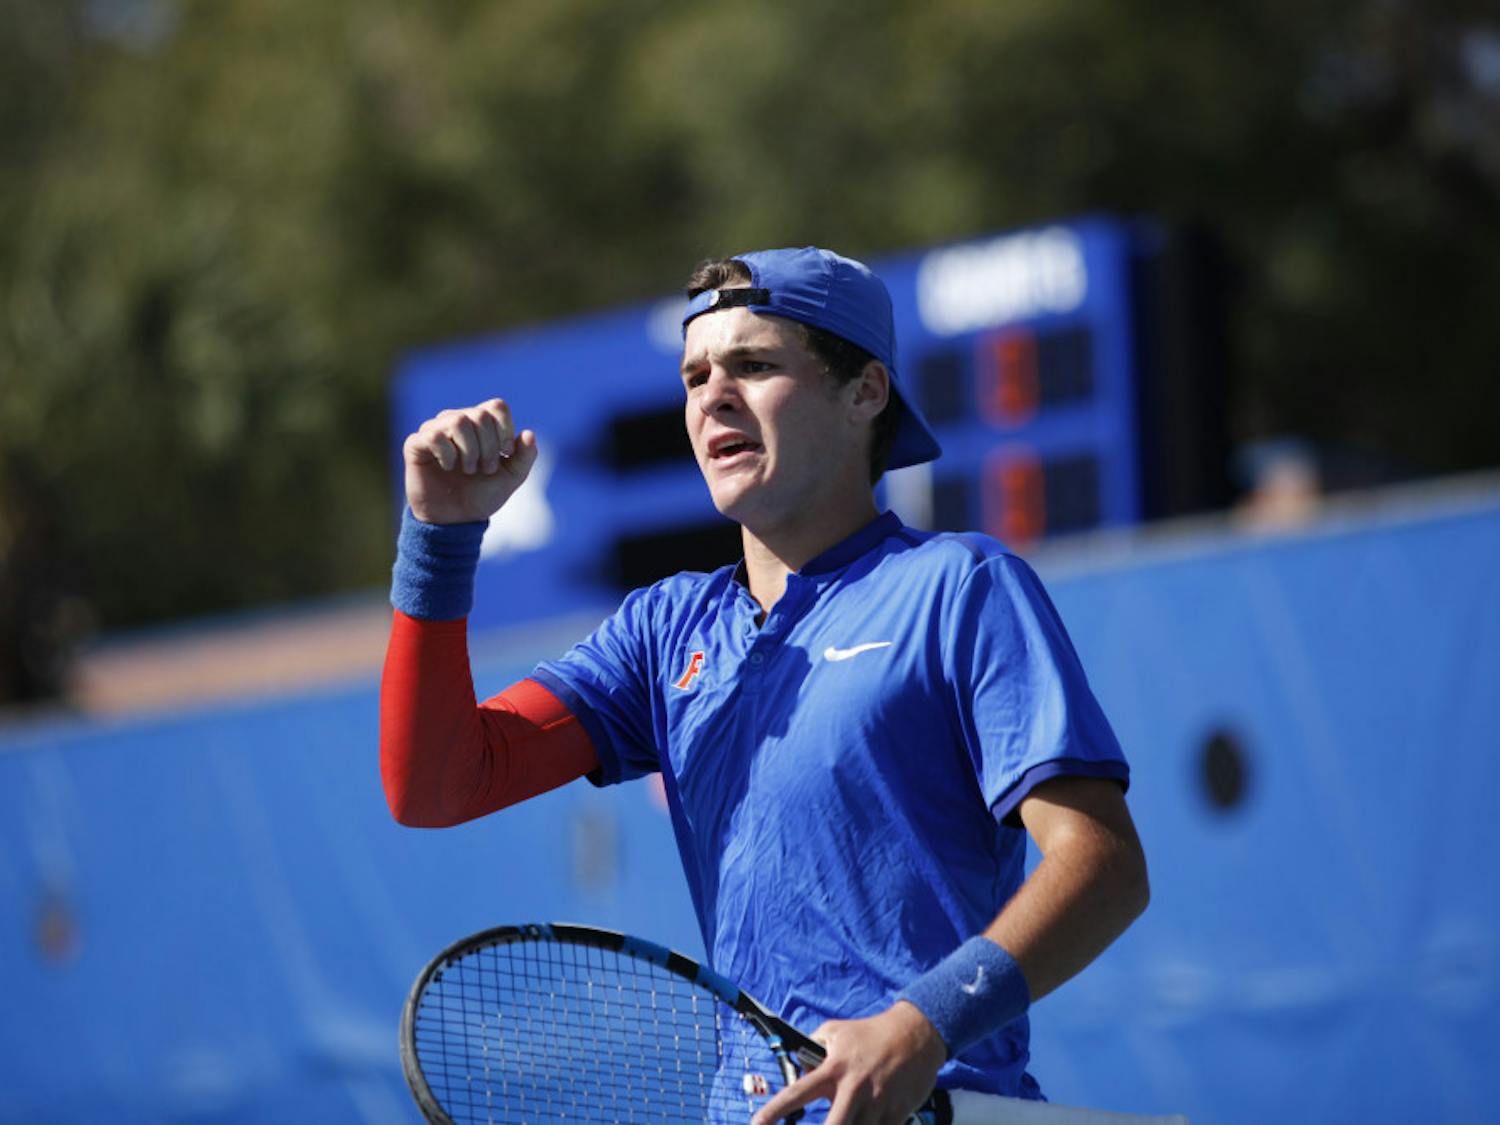 Junior McClain Kessler clinched the Round of 16 match for Florida over Ole Miss on Friday night, sending the Gators to the NCAA Quarterfinals.